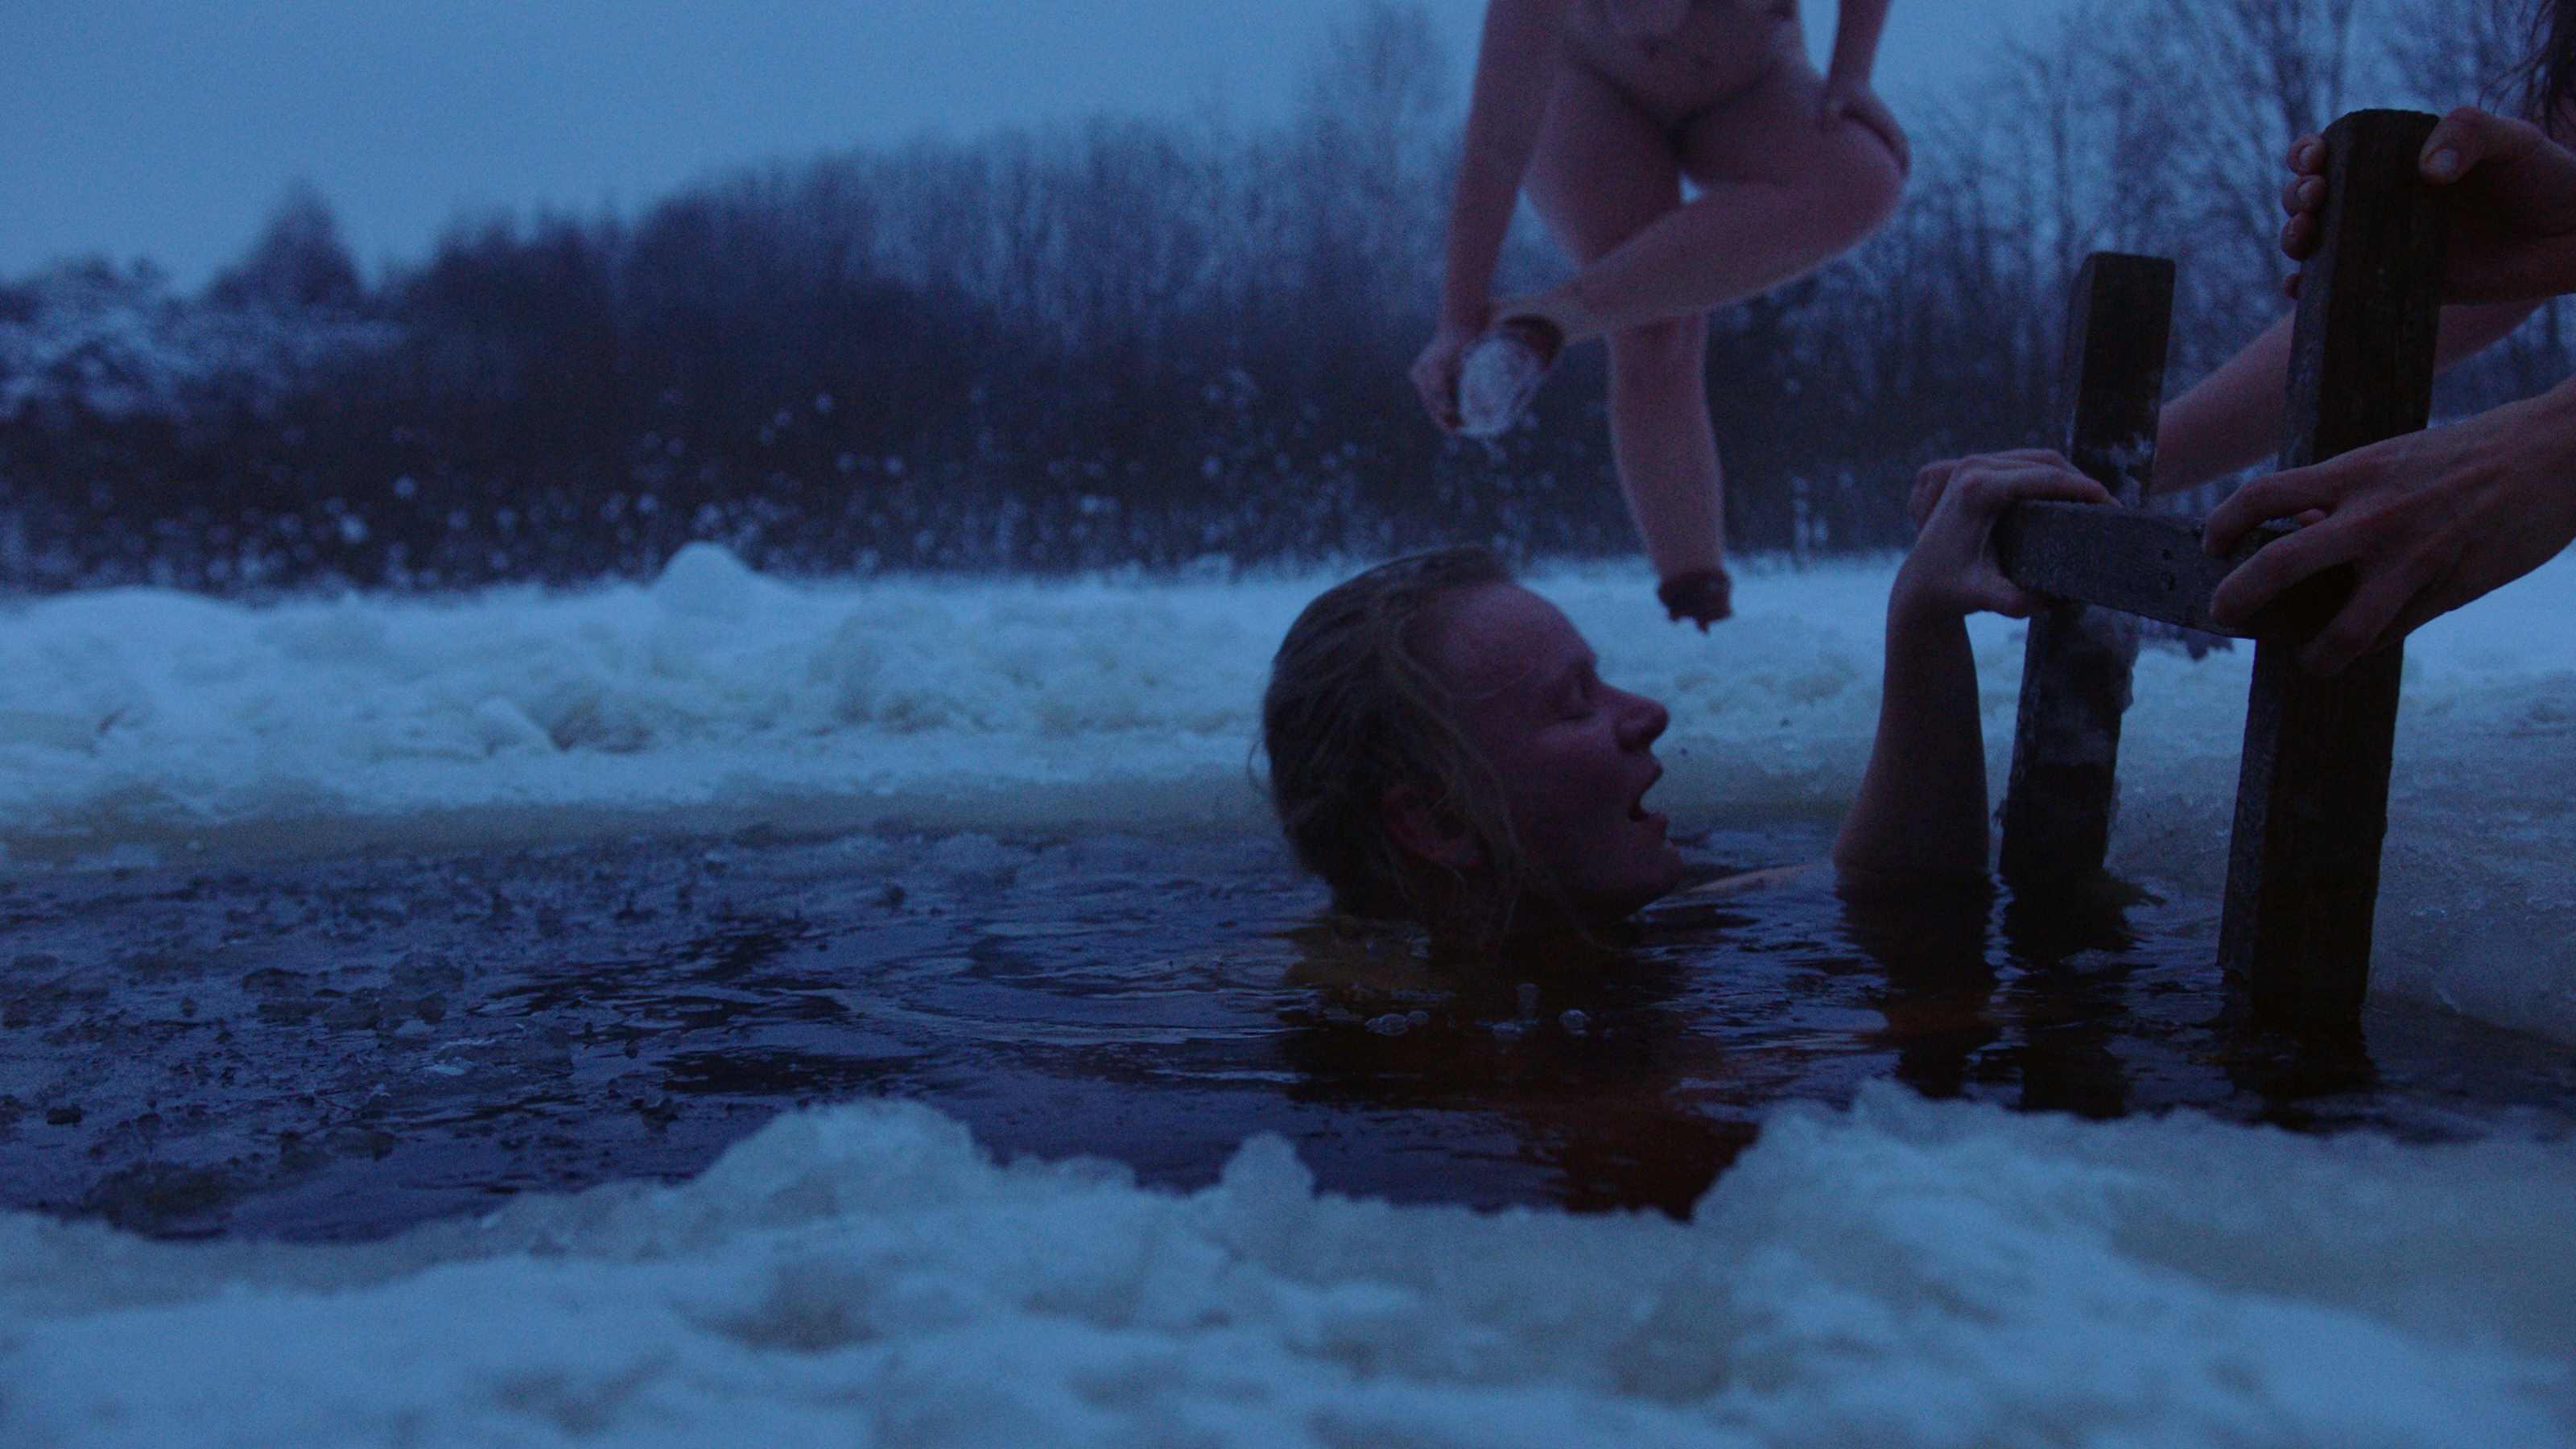 Nude women climbing out of water after swimming in snow-covered lake.